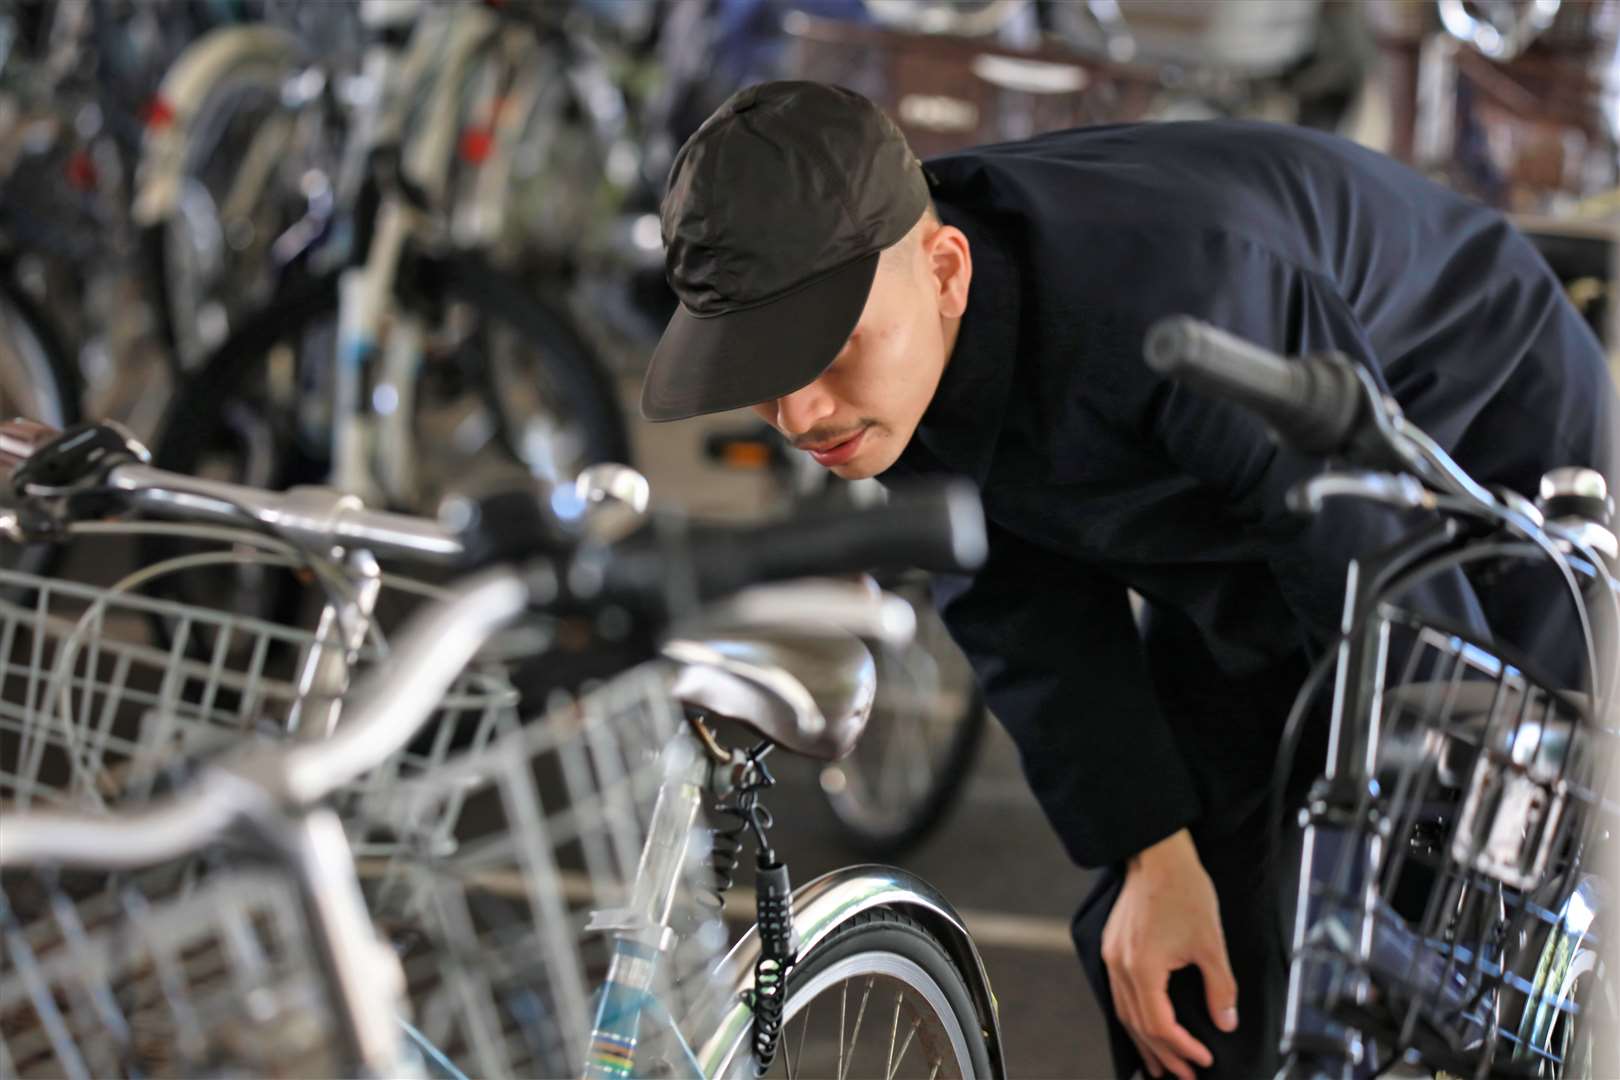 A new app is to help the police fight bike thefts.